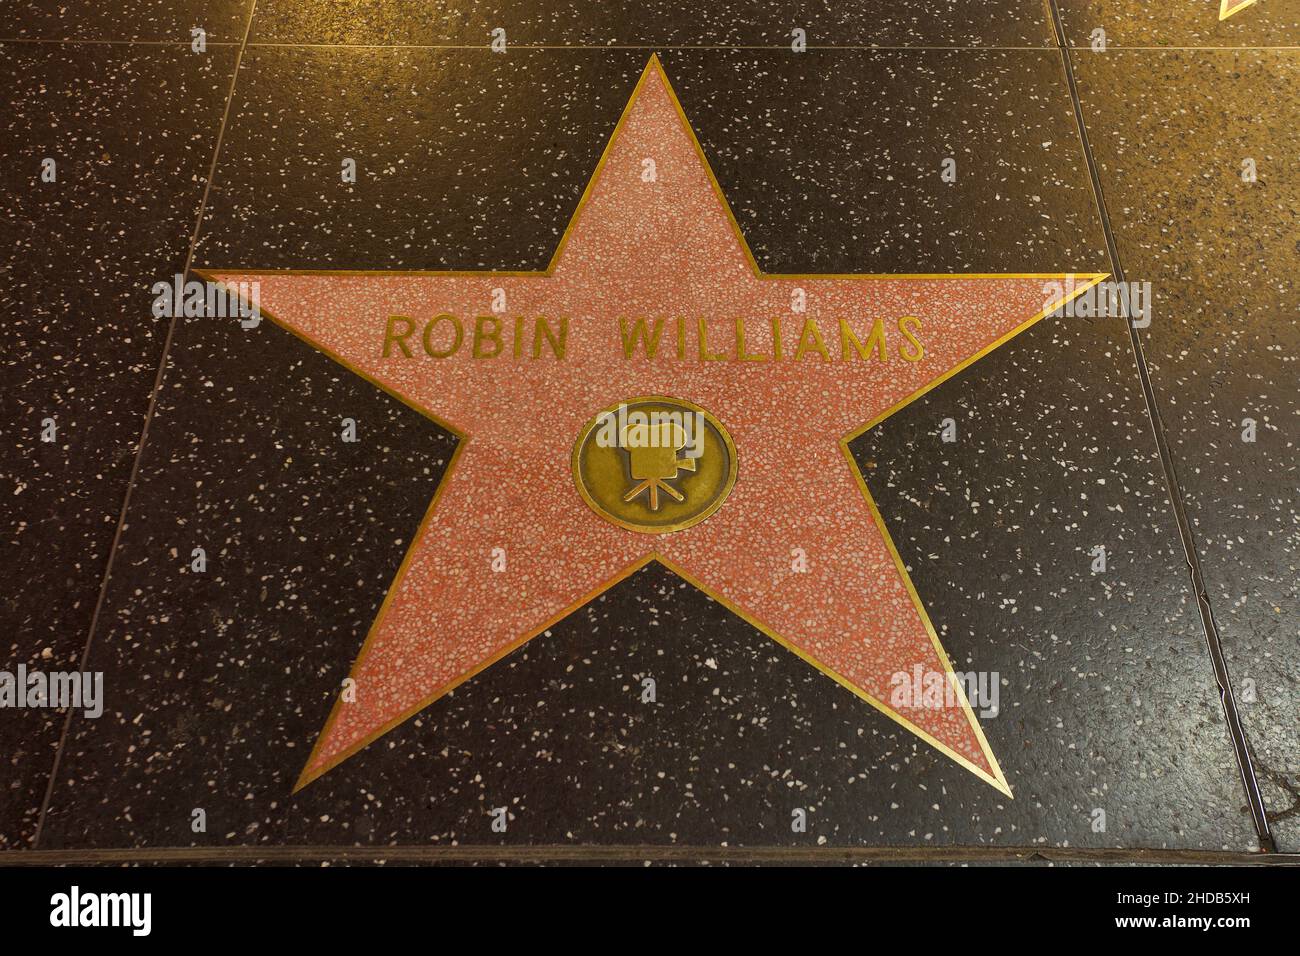 Robin Williams' star on the Hollywood Walk of Fame Stock Photo